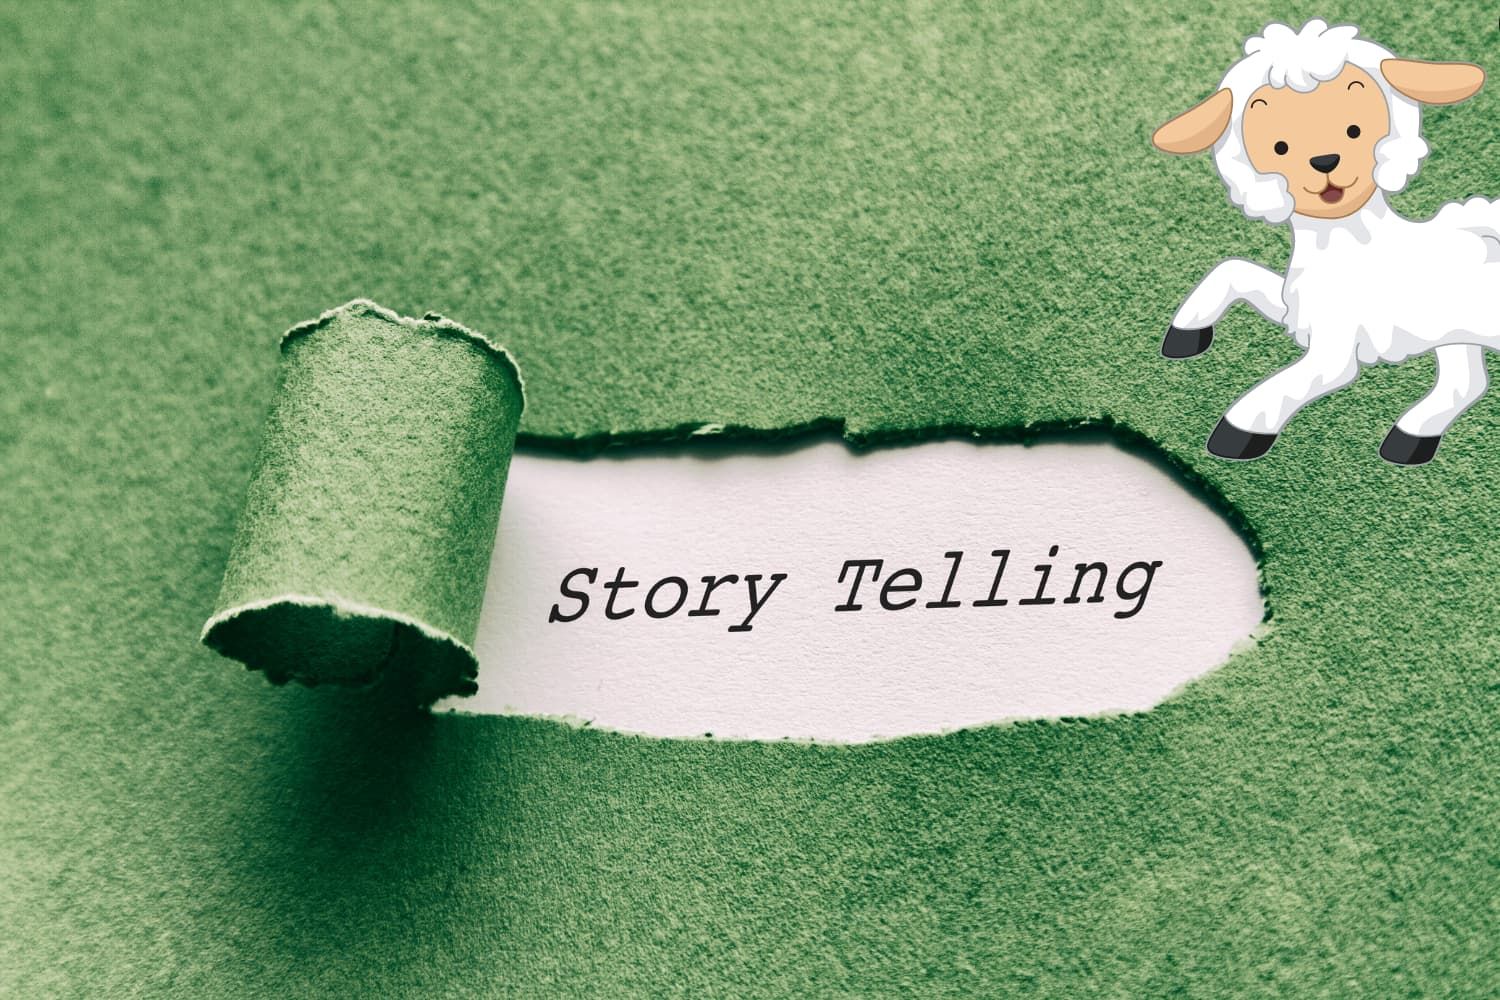 Storytelling%20tips%20-%20NT%20Parable%20of%20the%20lost%20sheep%20-%20Four%20tips%20to%20help%20you%20tell%20the%20story-0b70d295 Matthew